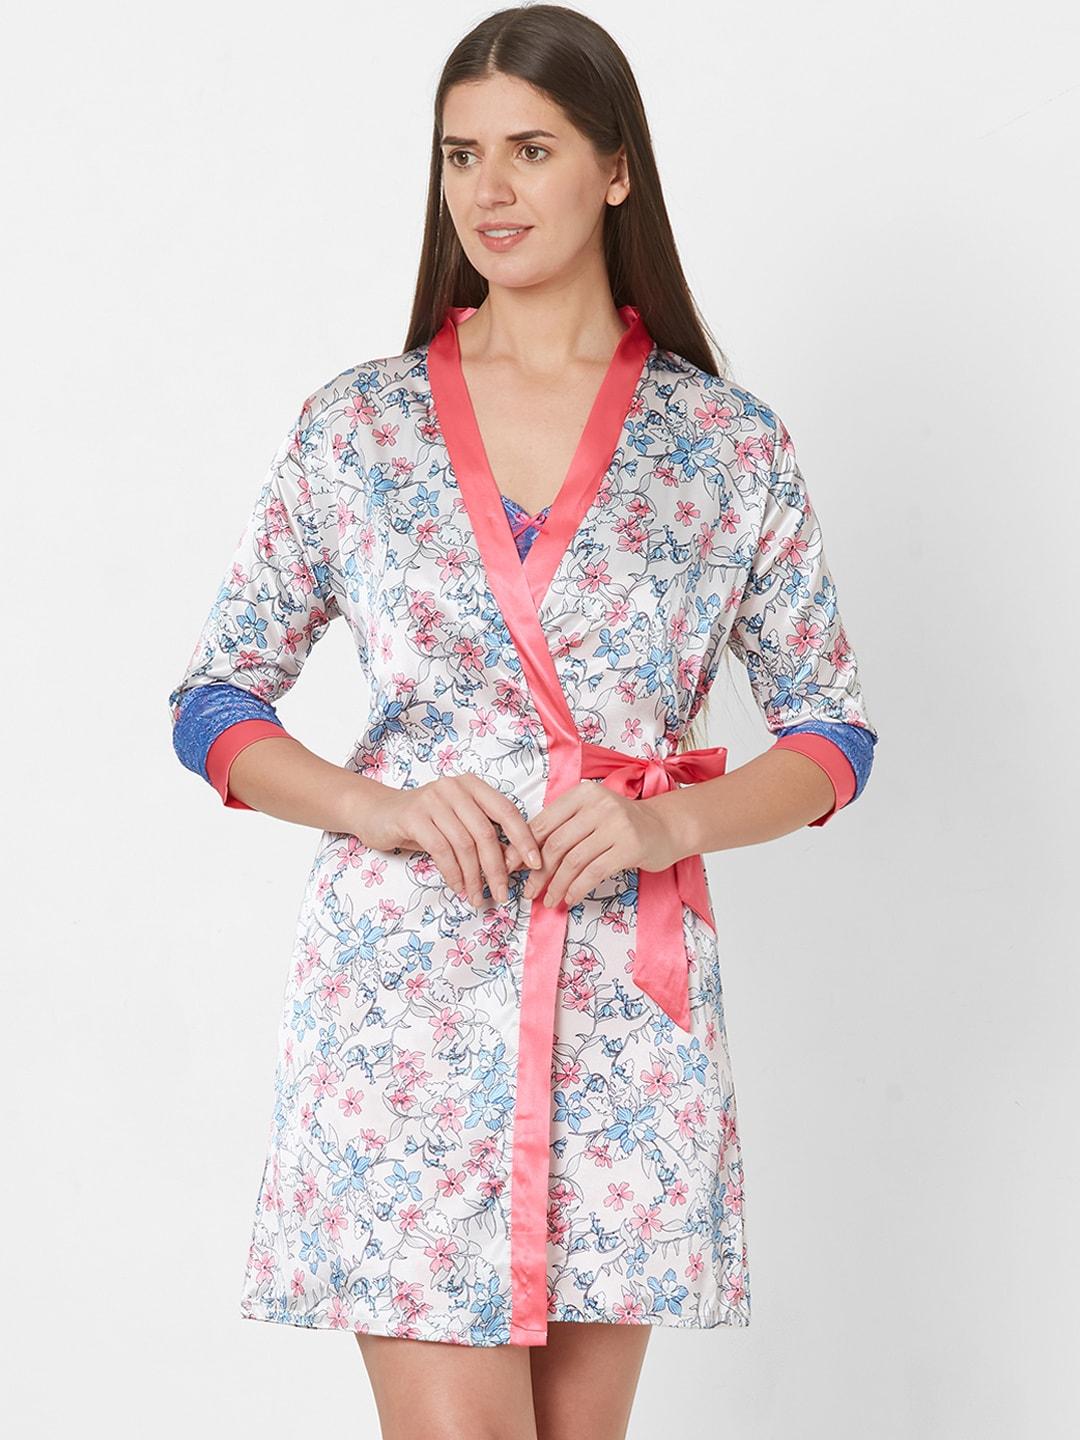 sweet-dreams-blue-&-pink-lace-nightdress-with-robe--2705at